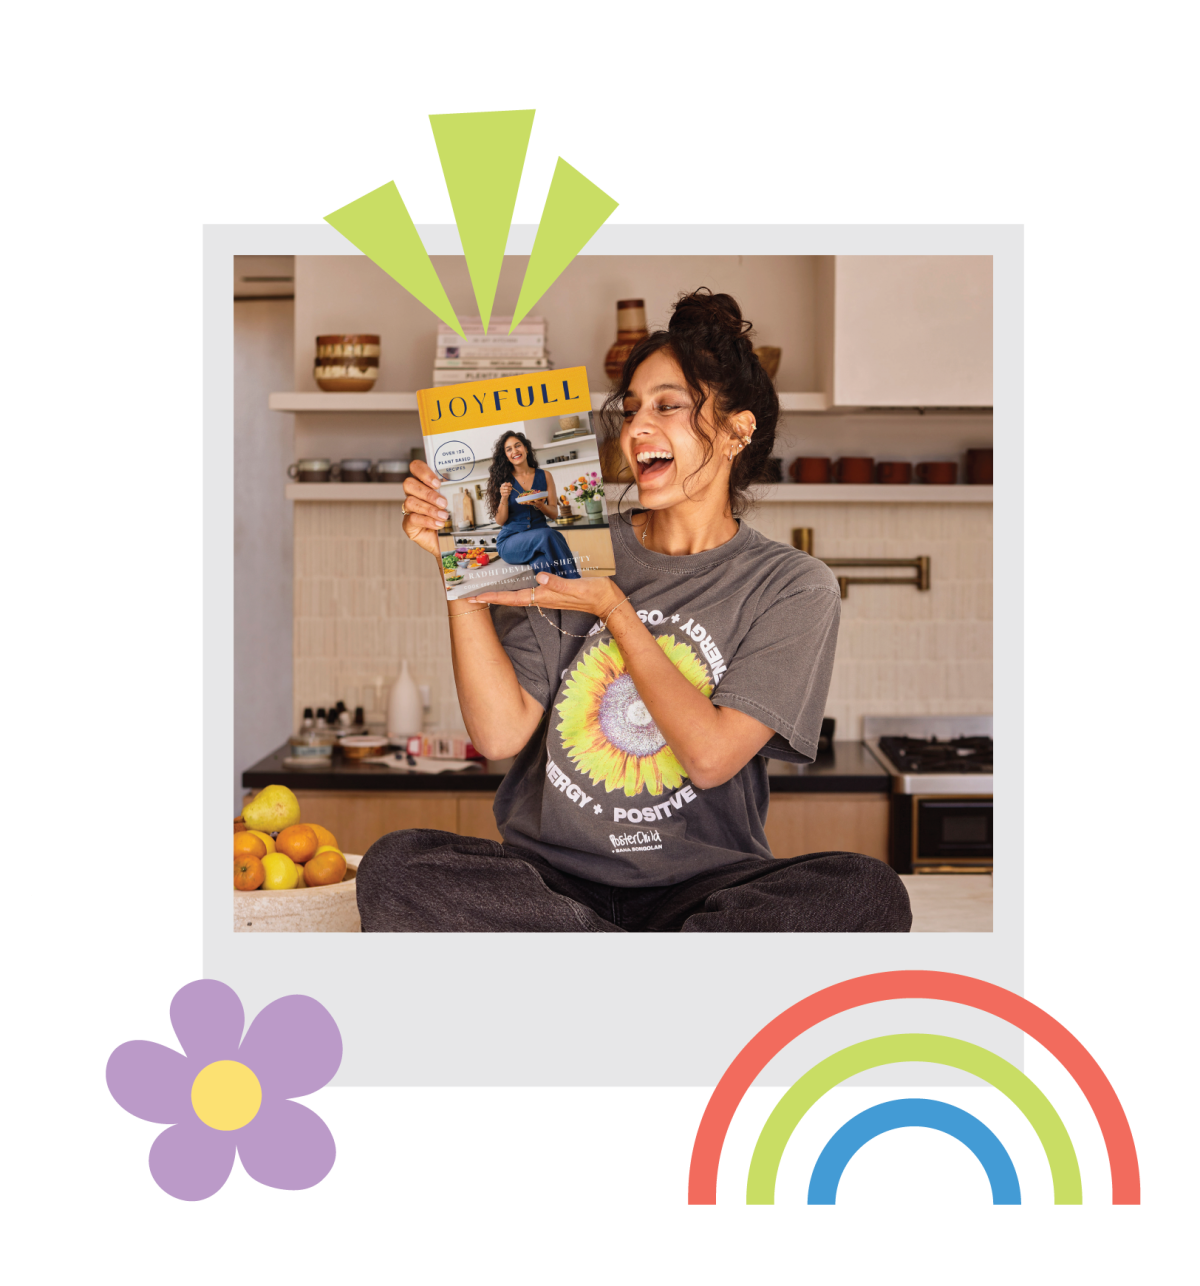 Photographic illustration in the form of a polaroid of a woman holding a book, with illustrations of rainbows, flowers and triangles.